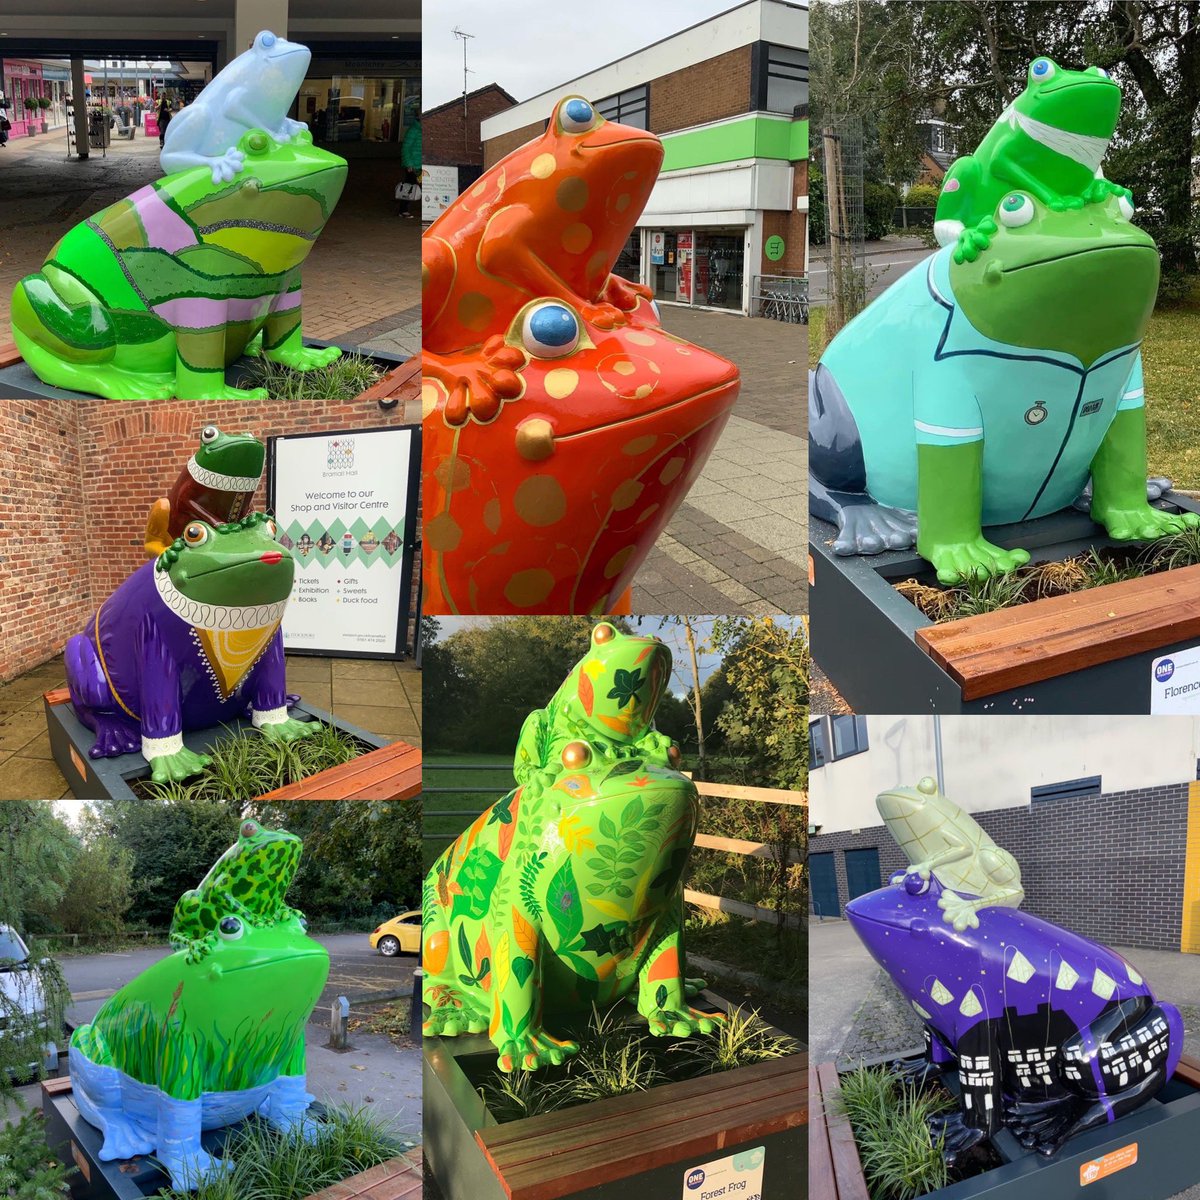 #stockportfrogs @totallysk auction tomorrow 🐸 includes 7 of the 17 @OneStockport frogs I painted with @ArcStockport volunteers simoncharles-auctioneers.co.uk/auctions/8192/… @SimonCharlesUK gets your bids in now and help raise money for @StAnnsHospice